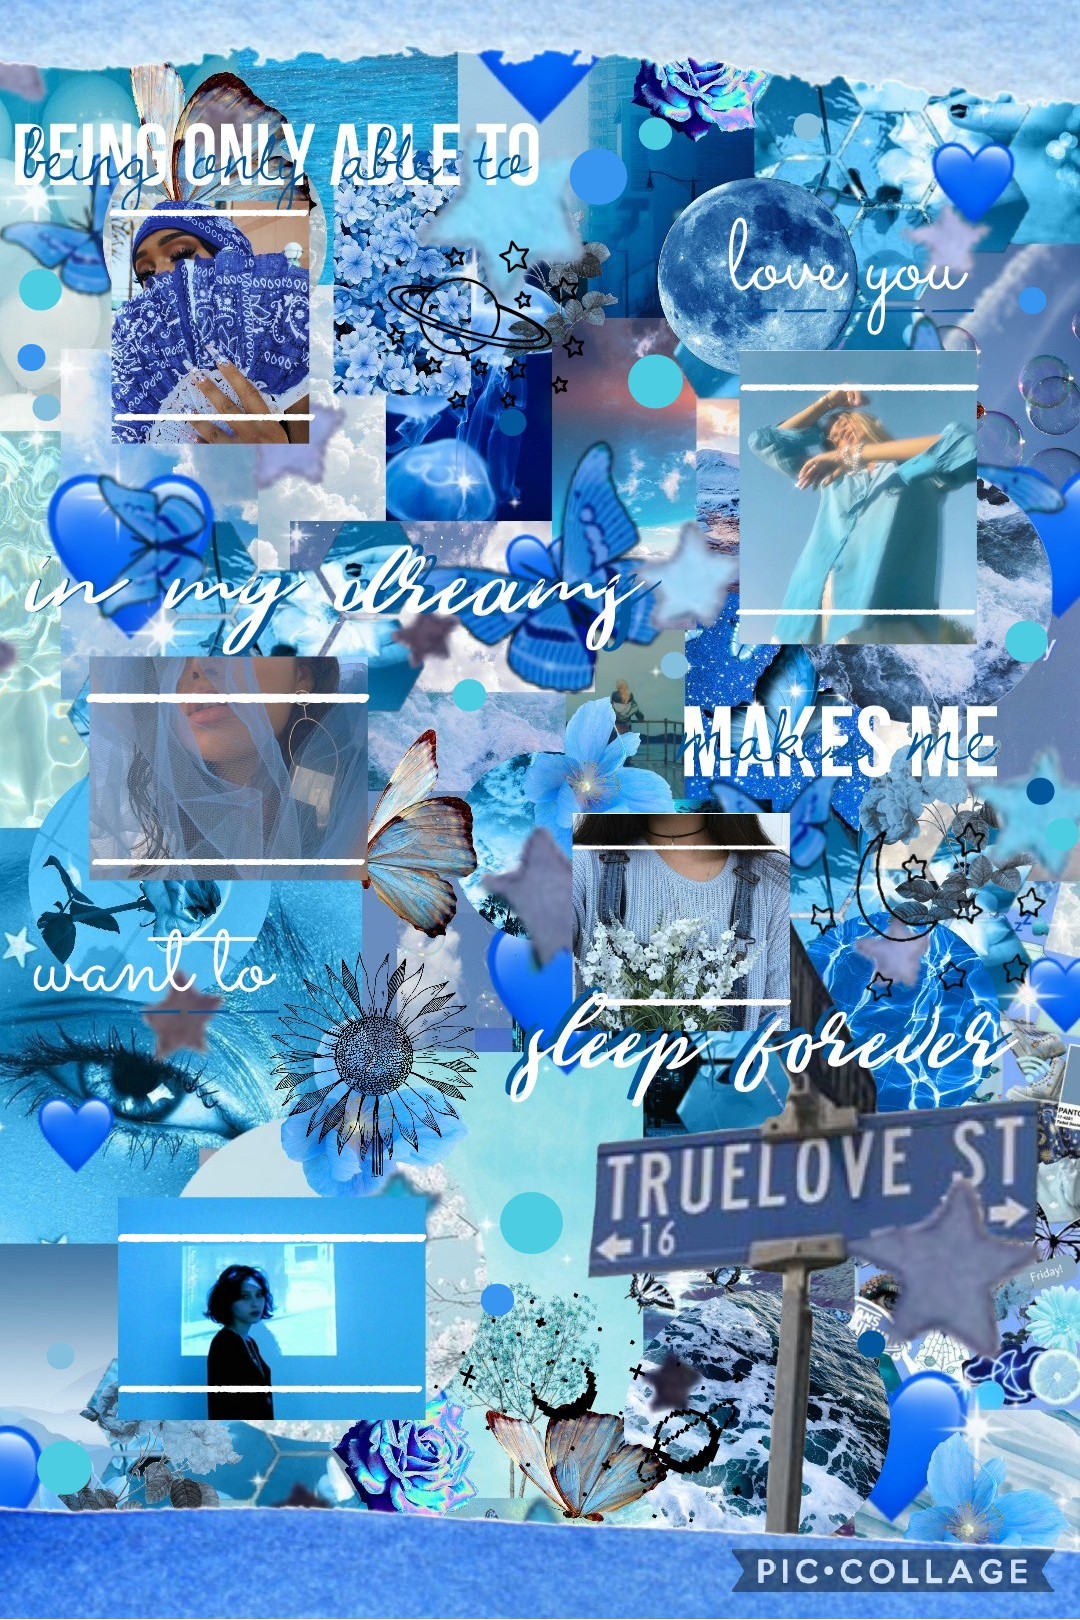 bLoO collage 🤡 I made this at eleven so ik it's messy aha. pc doesn't want me to post this for isle reason 😫 
question- would u guys wanna see my art/poetry/stories/songs on here? lmk ly guys xx